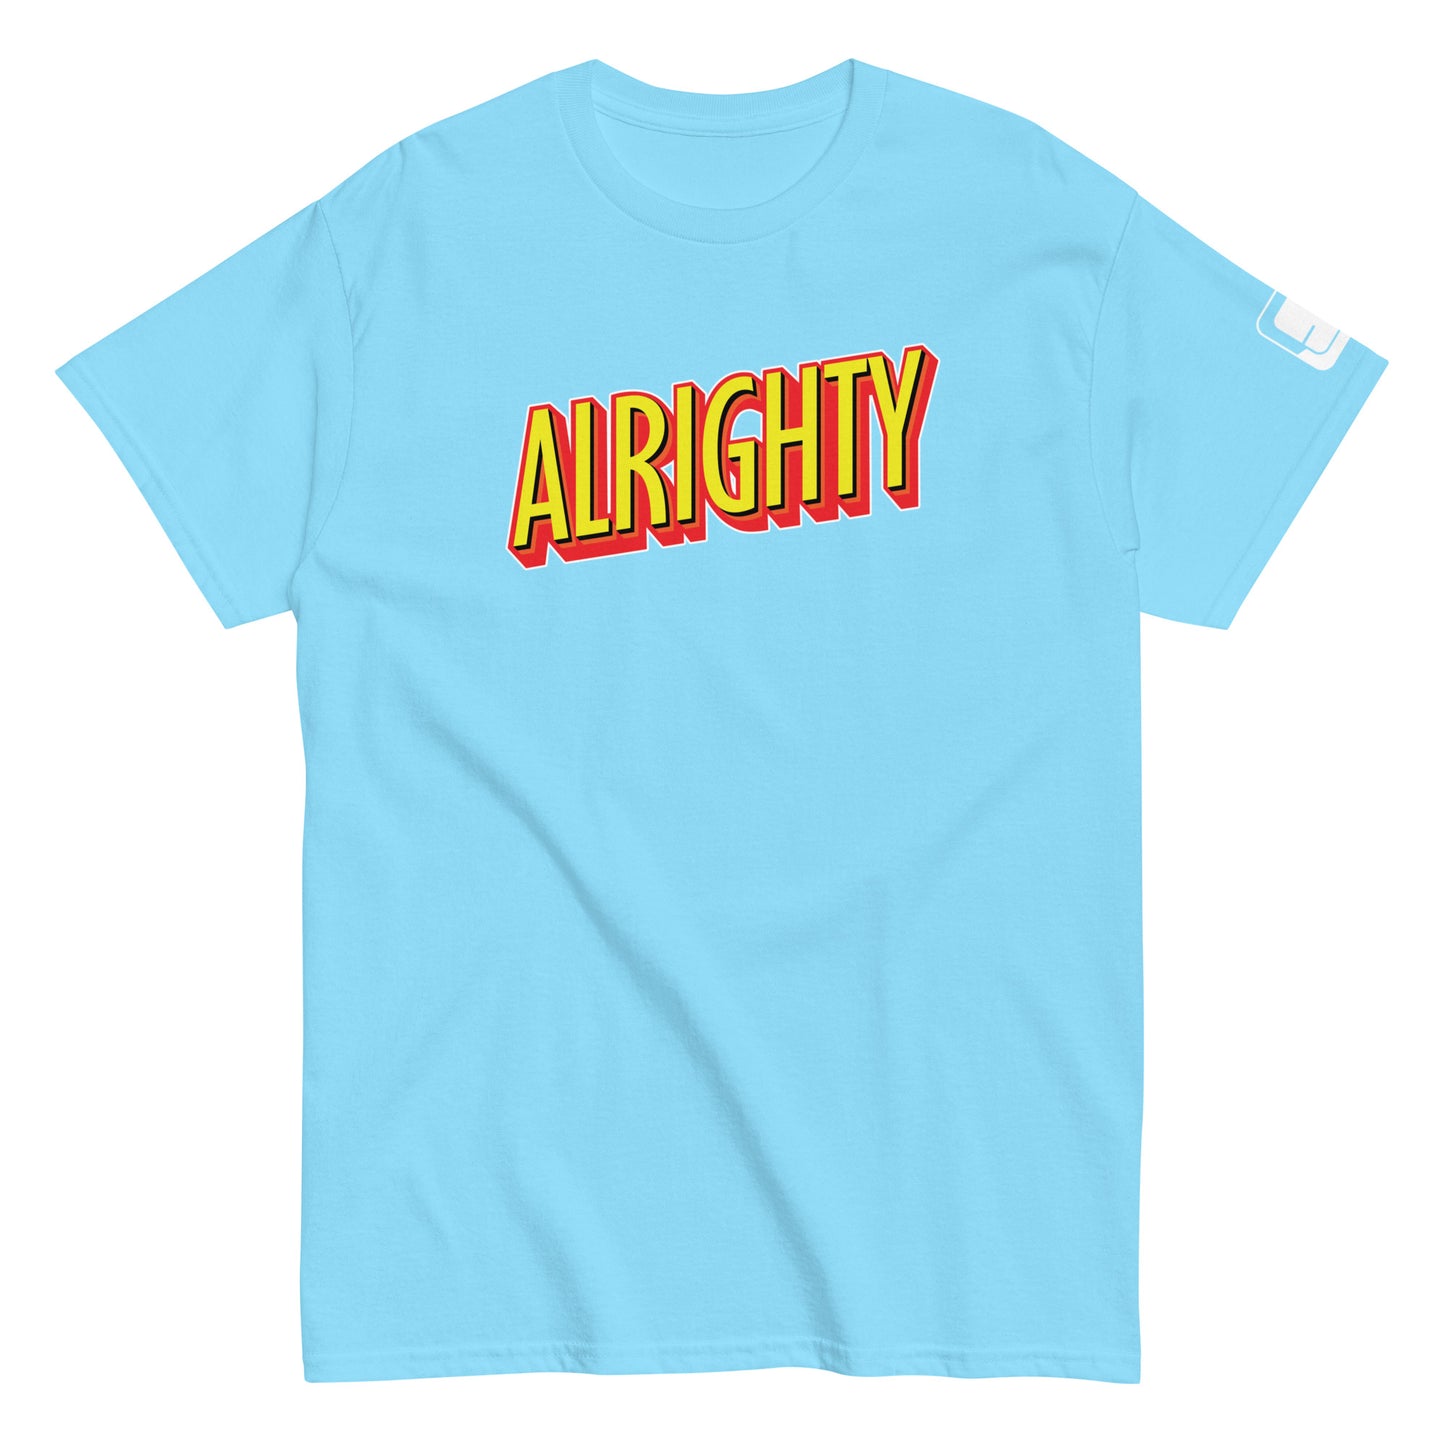 Sky t-shirt with the word 'ALRIGHTY' printed in a bold, red and yellow sans-serif font, featuring a small logo patch on the sleeve, laid flat against a white background.